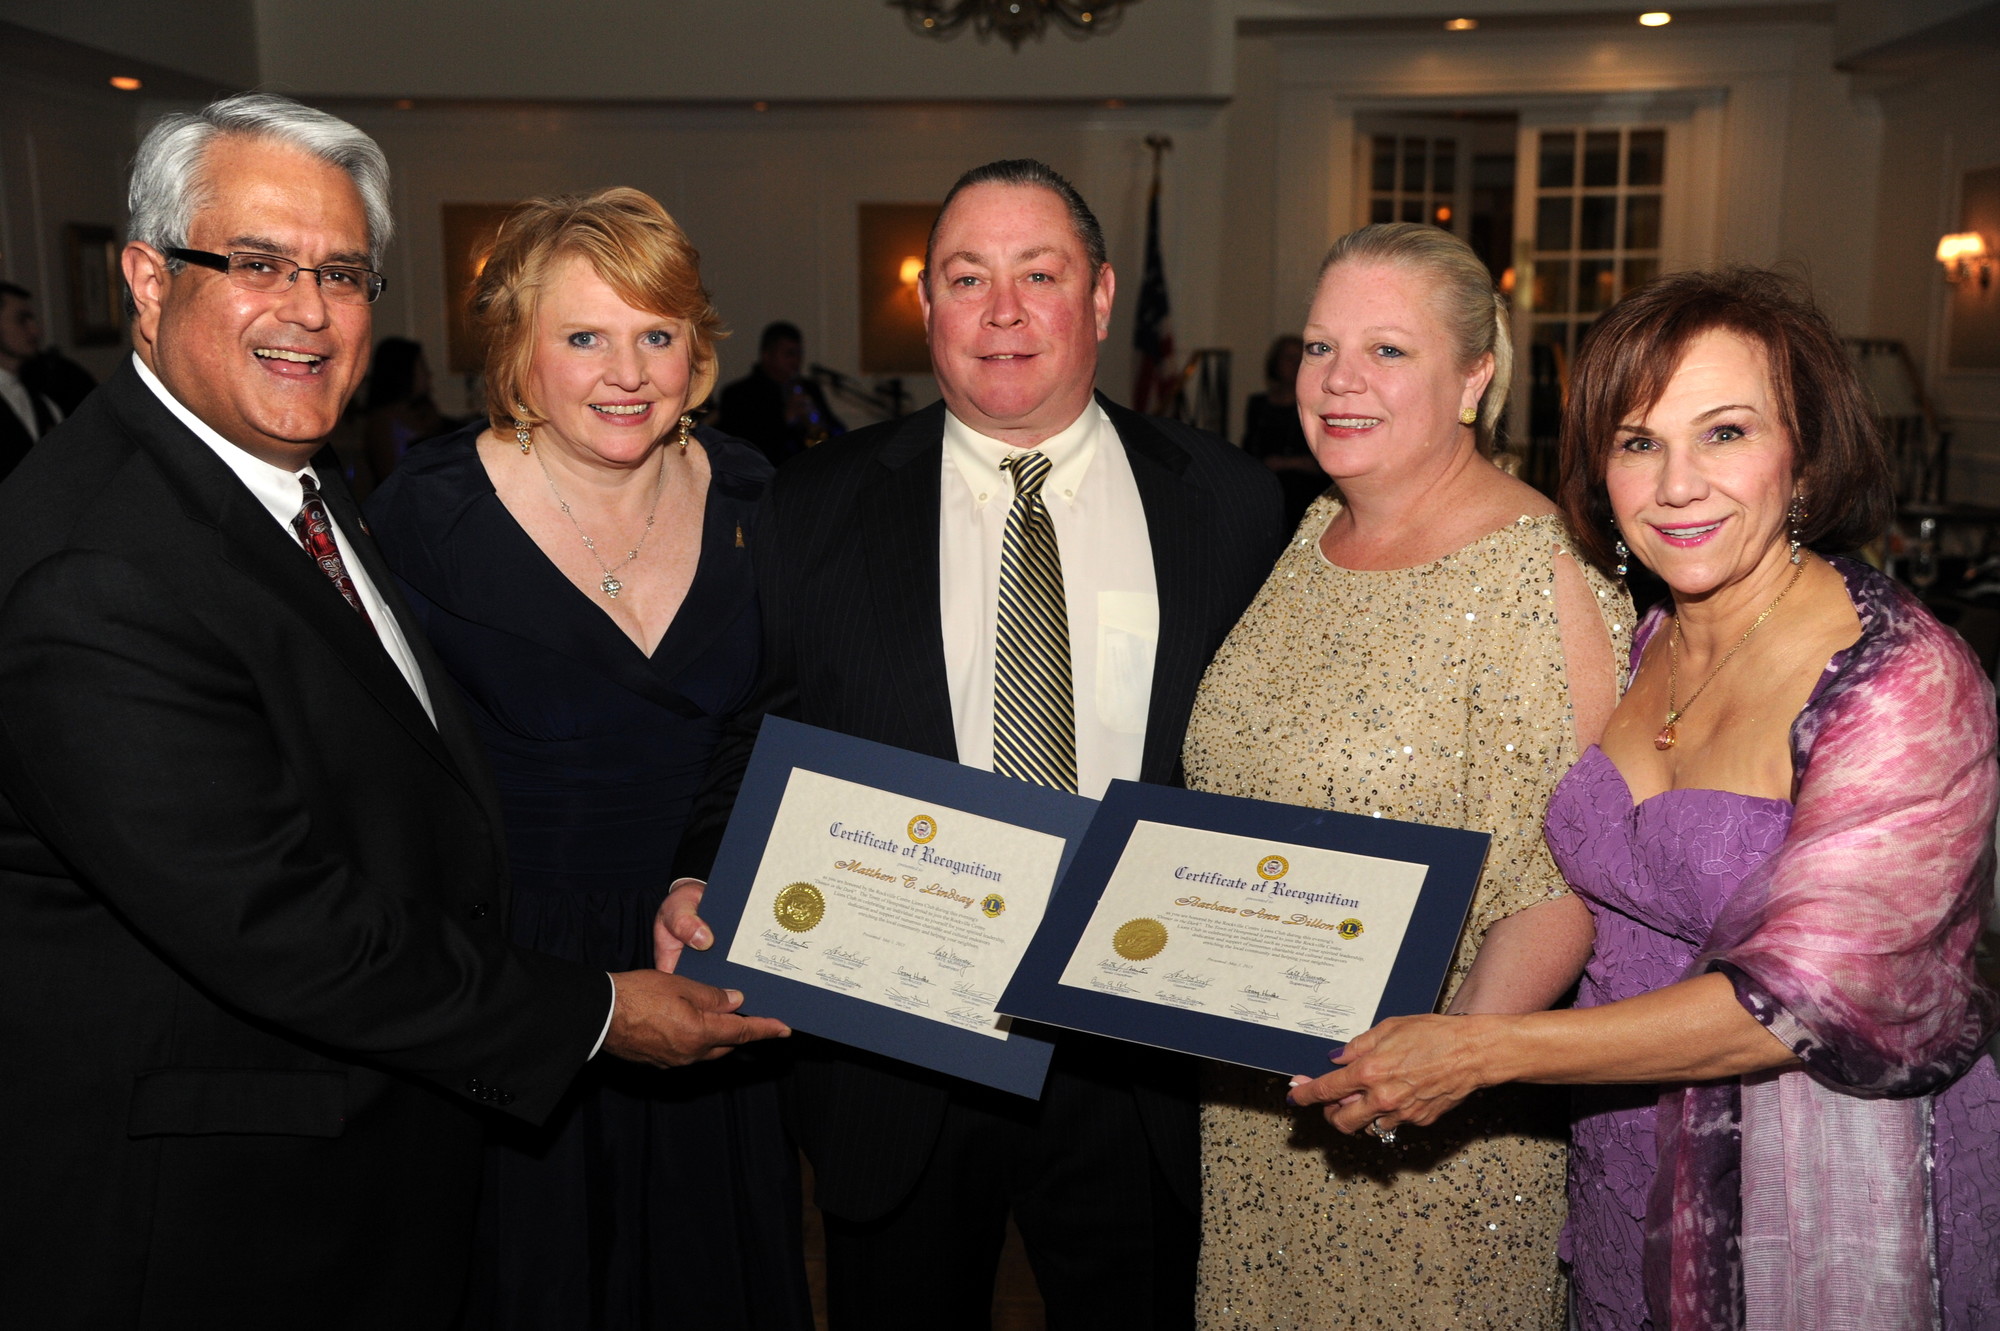 Town of Hempstead Councilman Anthony Santino, left, joined event co-organizers Lisa Spatz and Joan MacNaughton, right, in congratulating honorees Matthew Lindsay, center, and Barbara Ann Dillon.